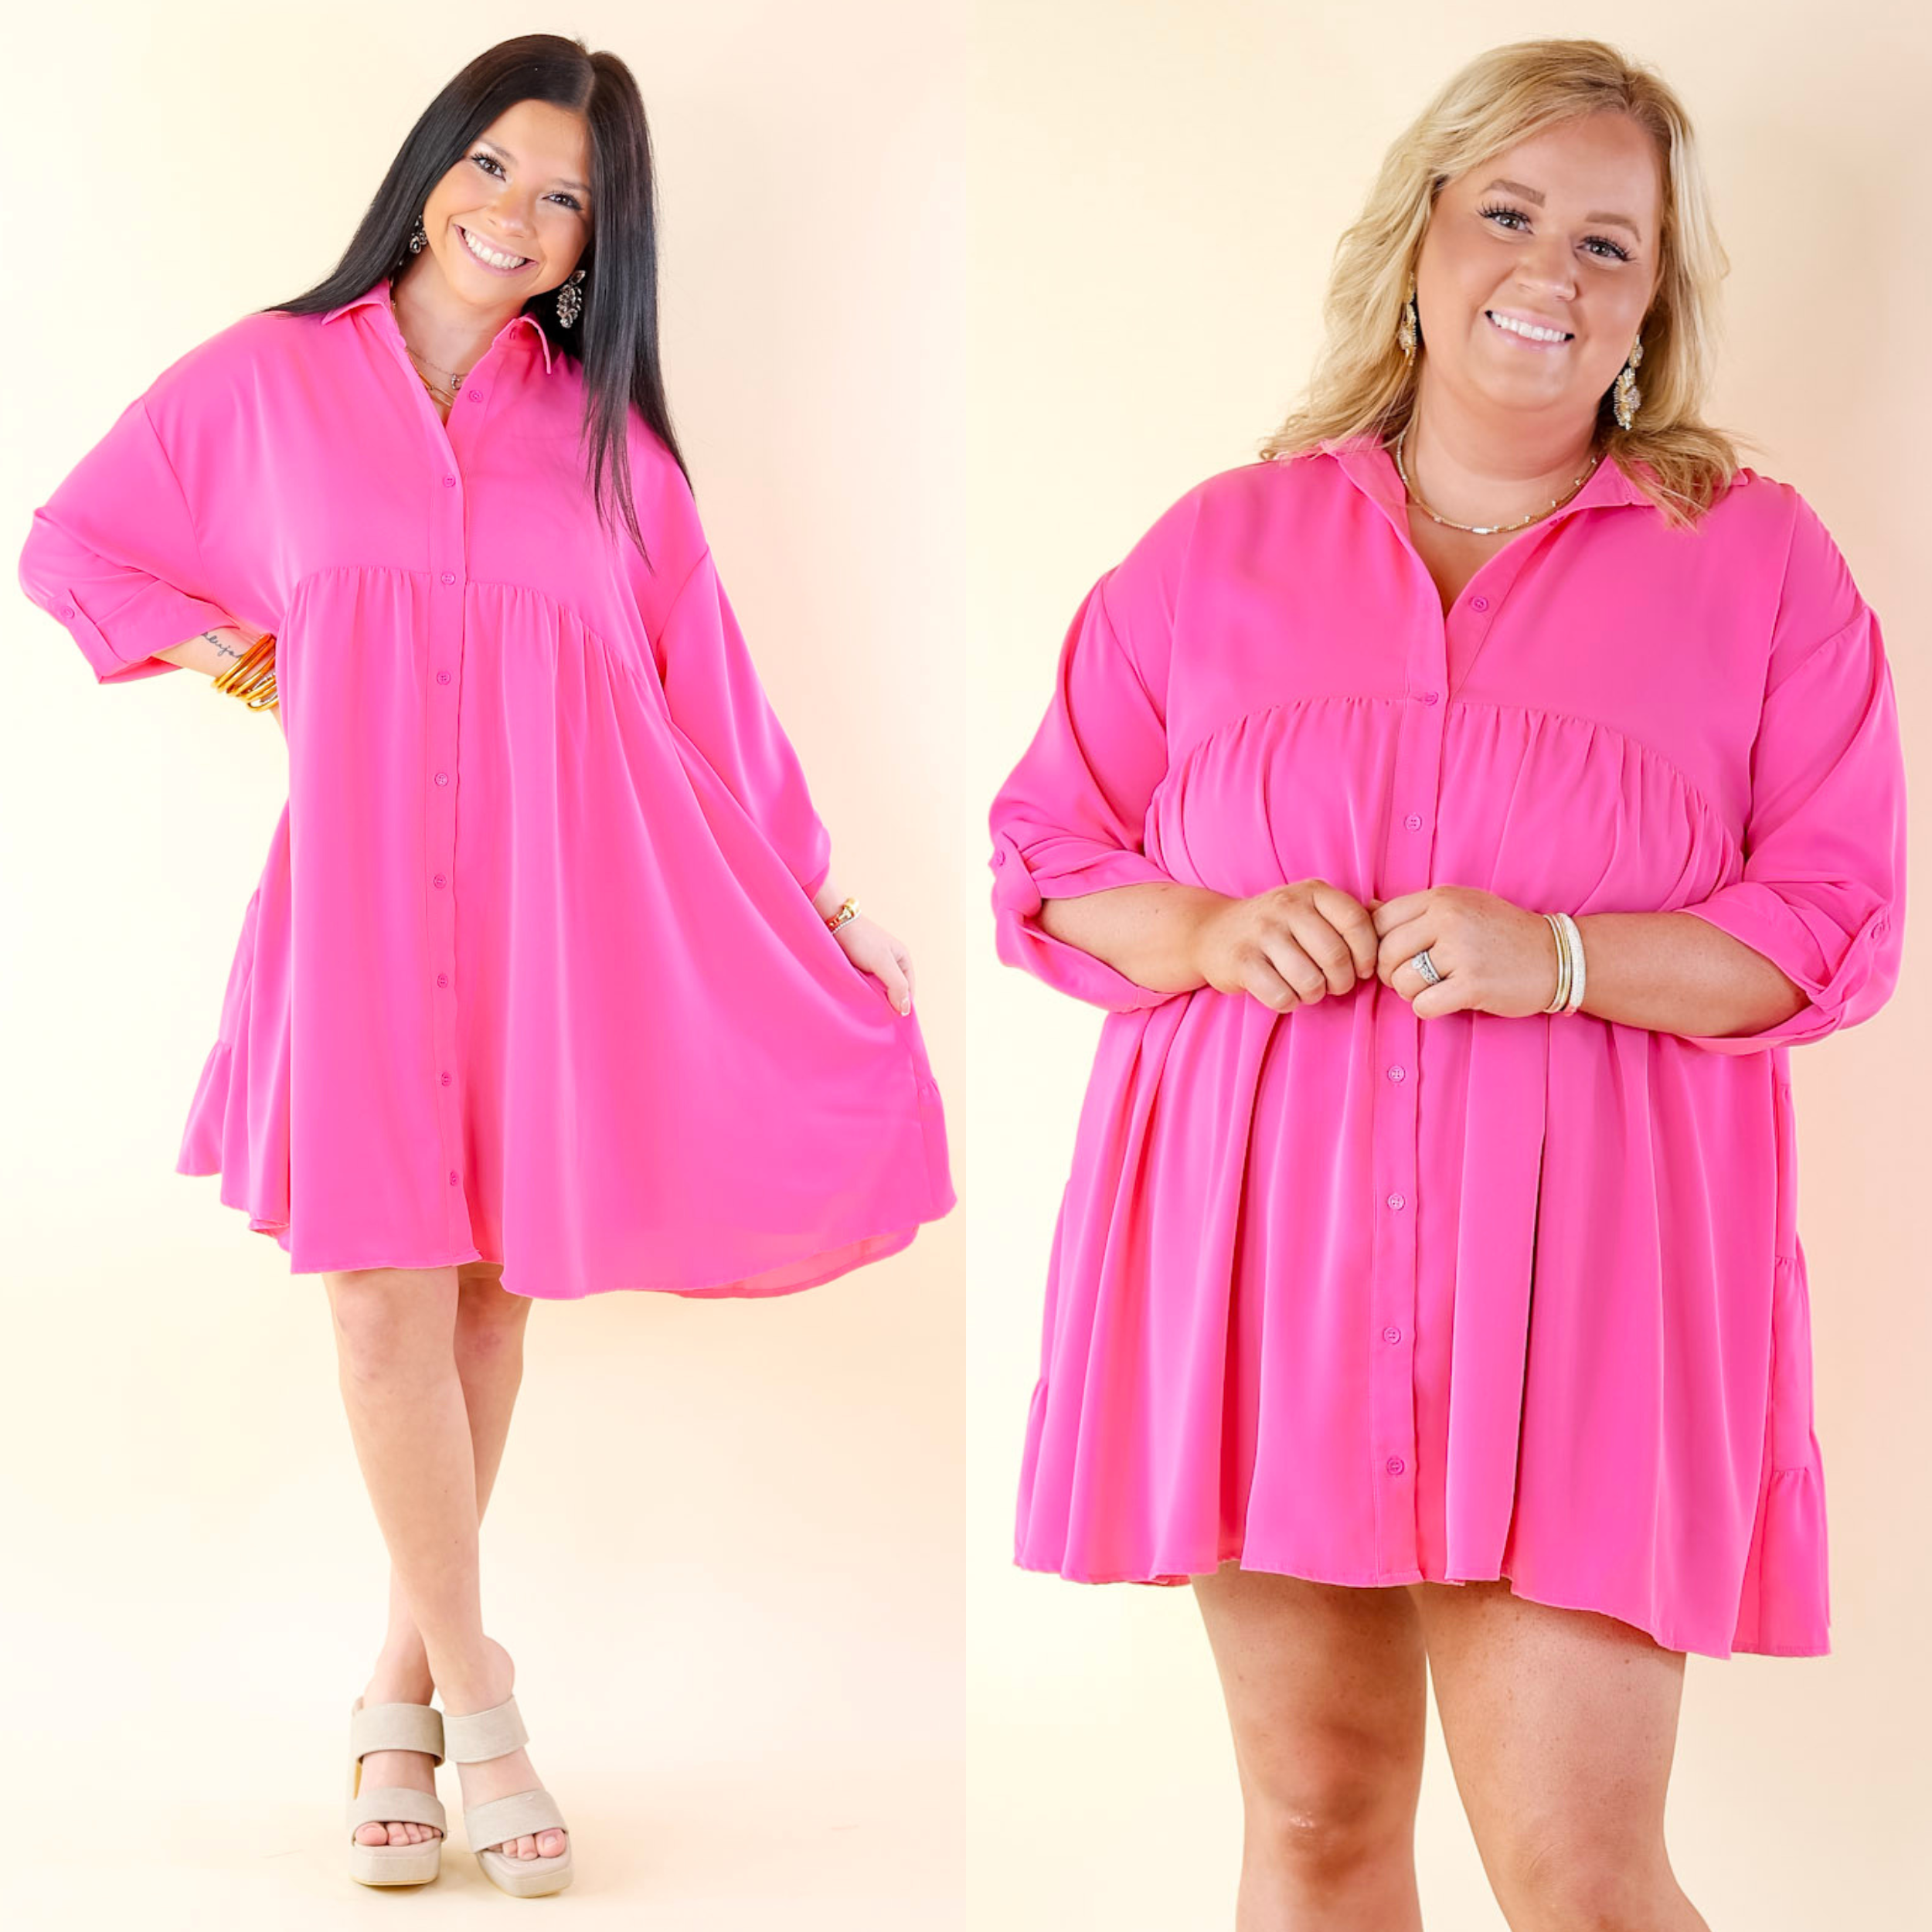 Risky Business Button Up Babydoll Dress in Pink - Giddy Up Glamour Boutique